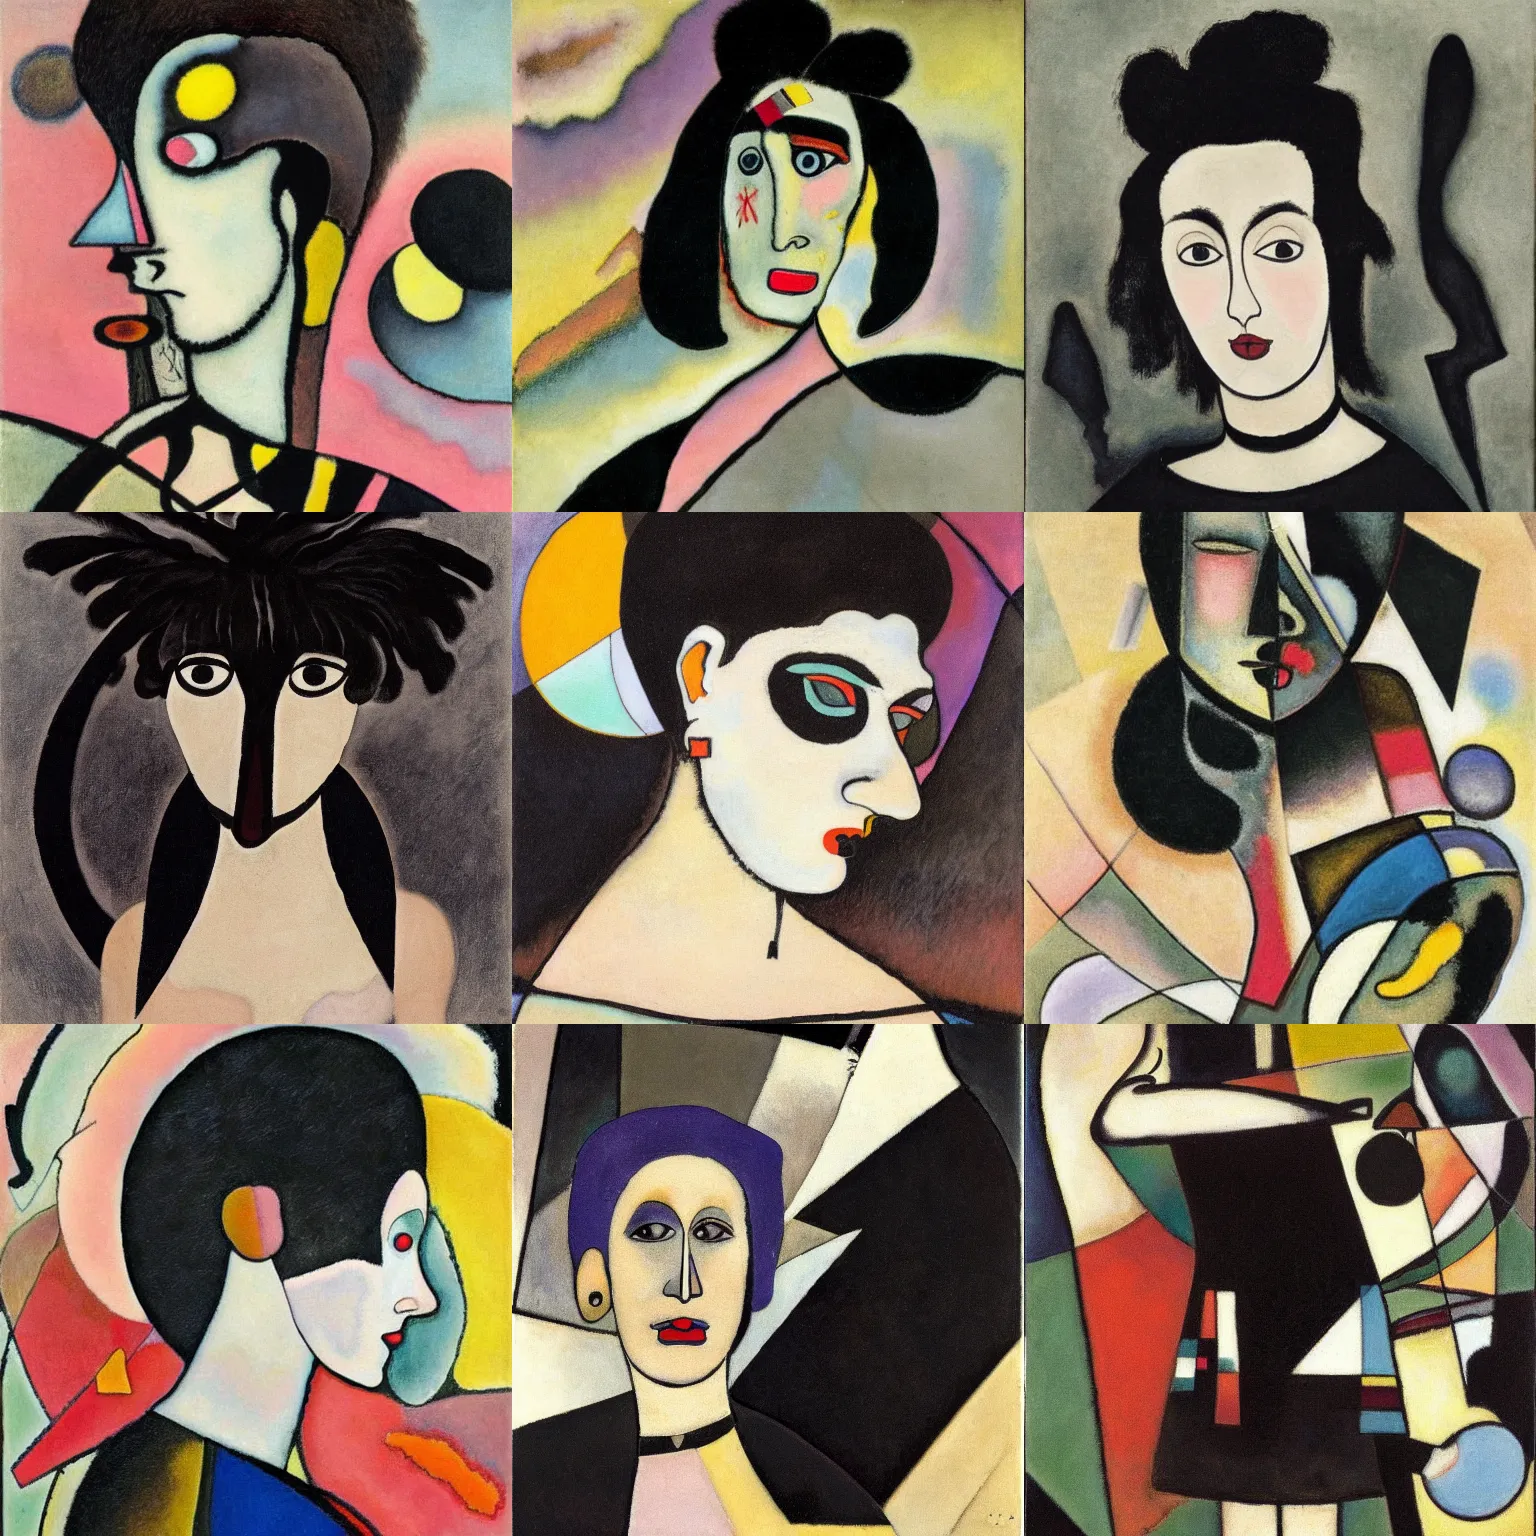 Prompt: A goth painted by Wassily Kandinsky. Her hair is dark brown and cut into a short, messy pixie cut. She has a slightly rounded face, with a pointed chin, large entirely-black eyes, and a small nose. She is wearing a black tank top, a black leather jacket, a black knee-length skirt, a black choker, and black leather boots.